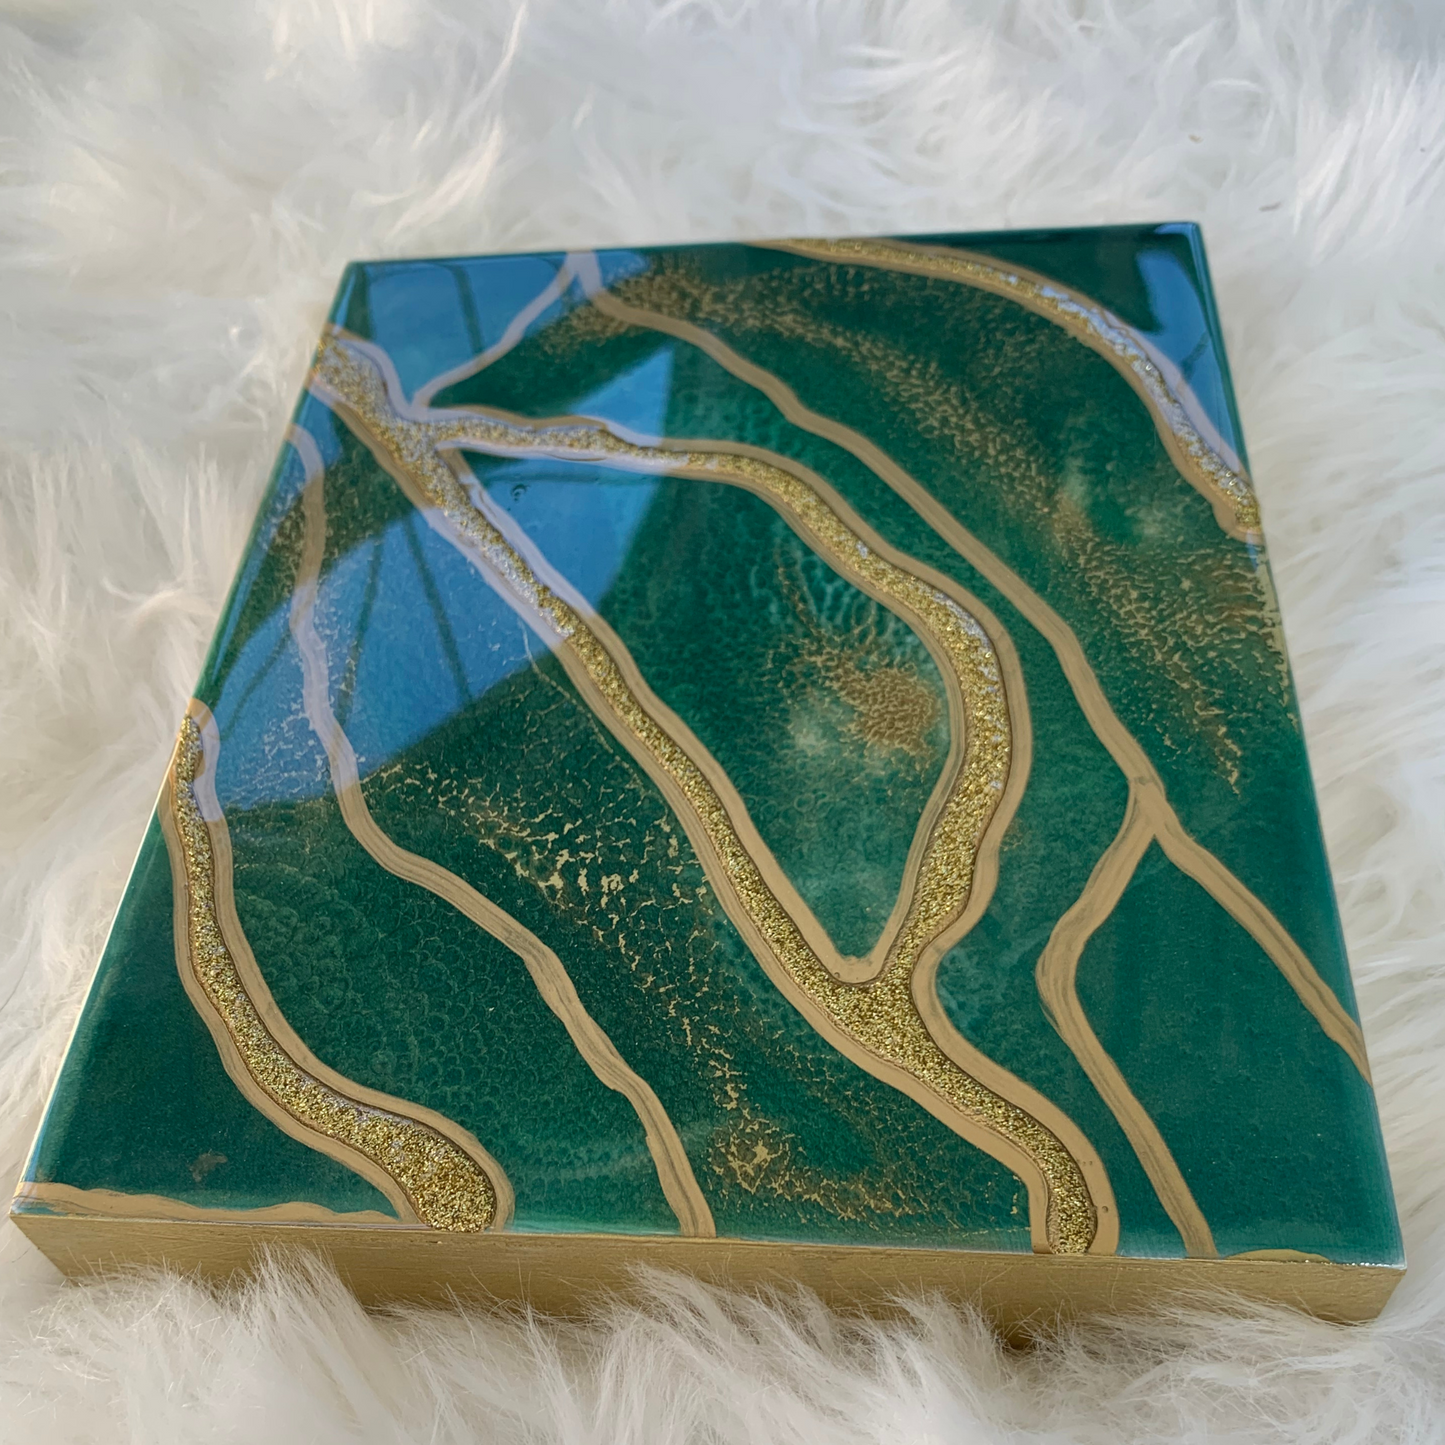 Envy- Gorgeous Green & Gold 9x12 inch Cradled Wood Panel